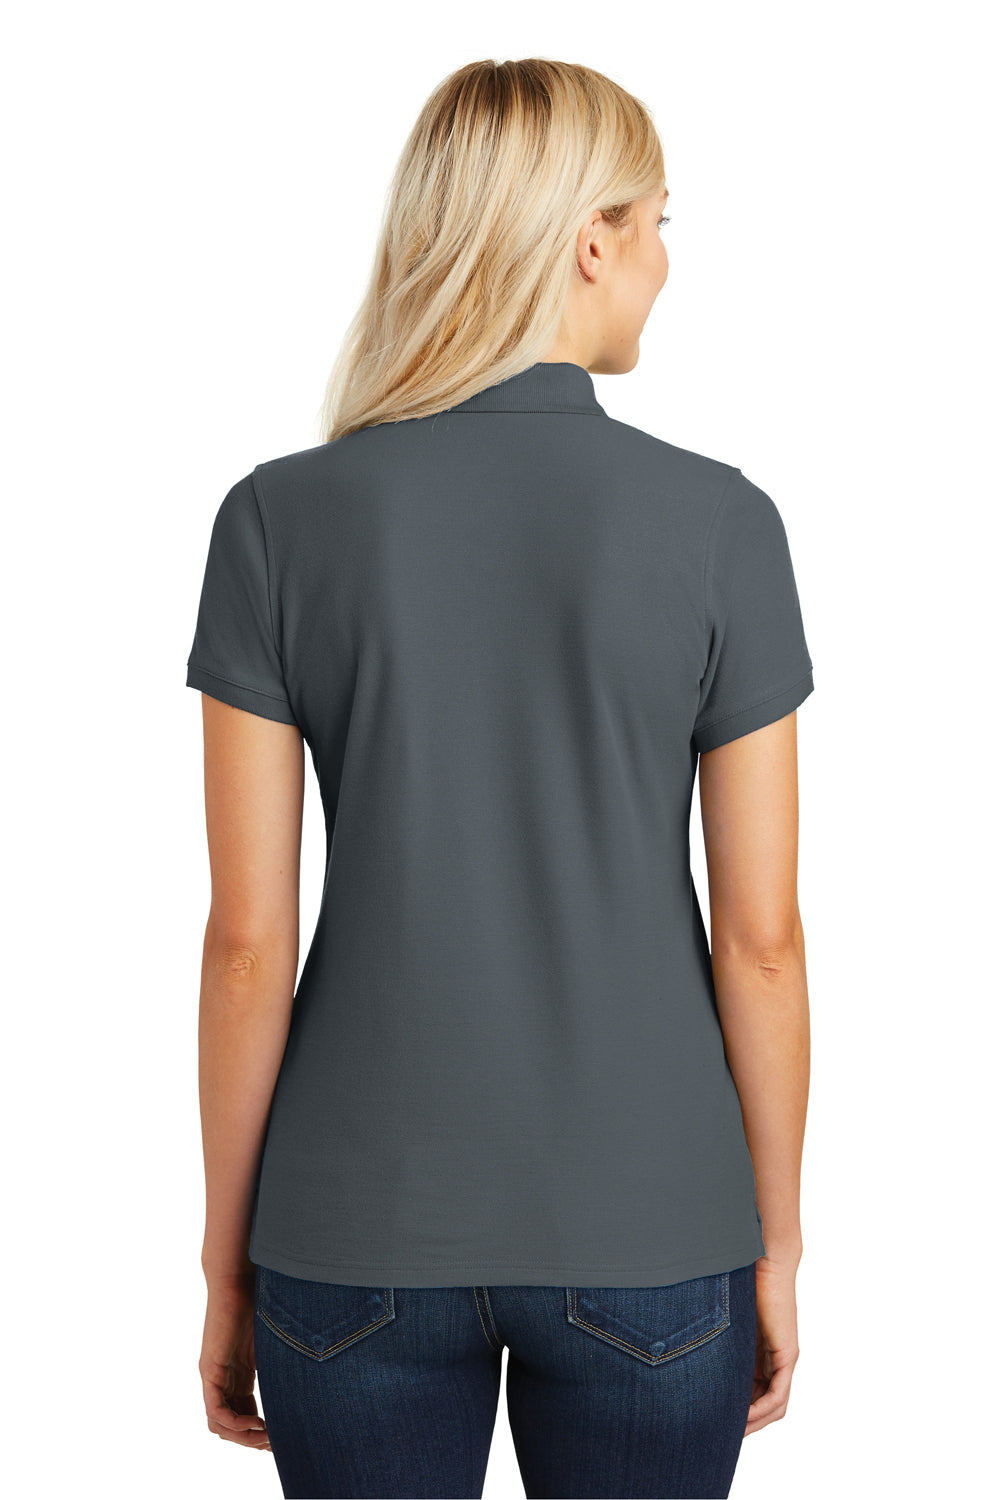 Port Authority L100 Womens Core Classic Short Sleeve Polo Shirt Graphite Grey Back